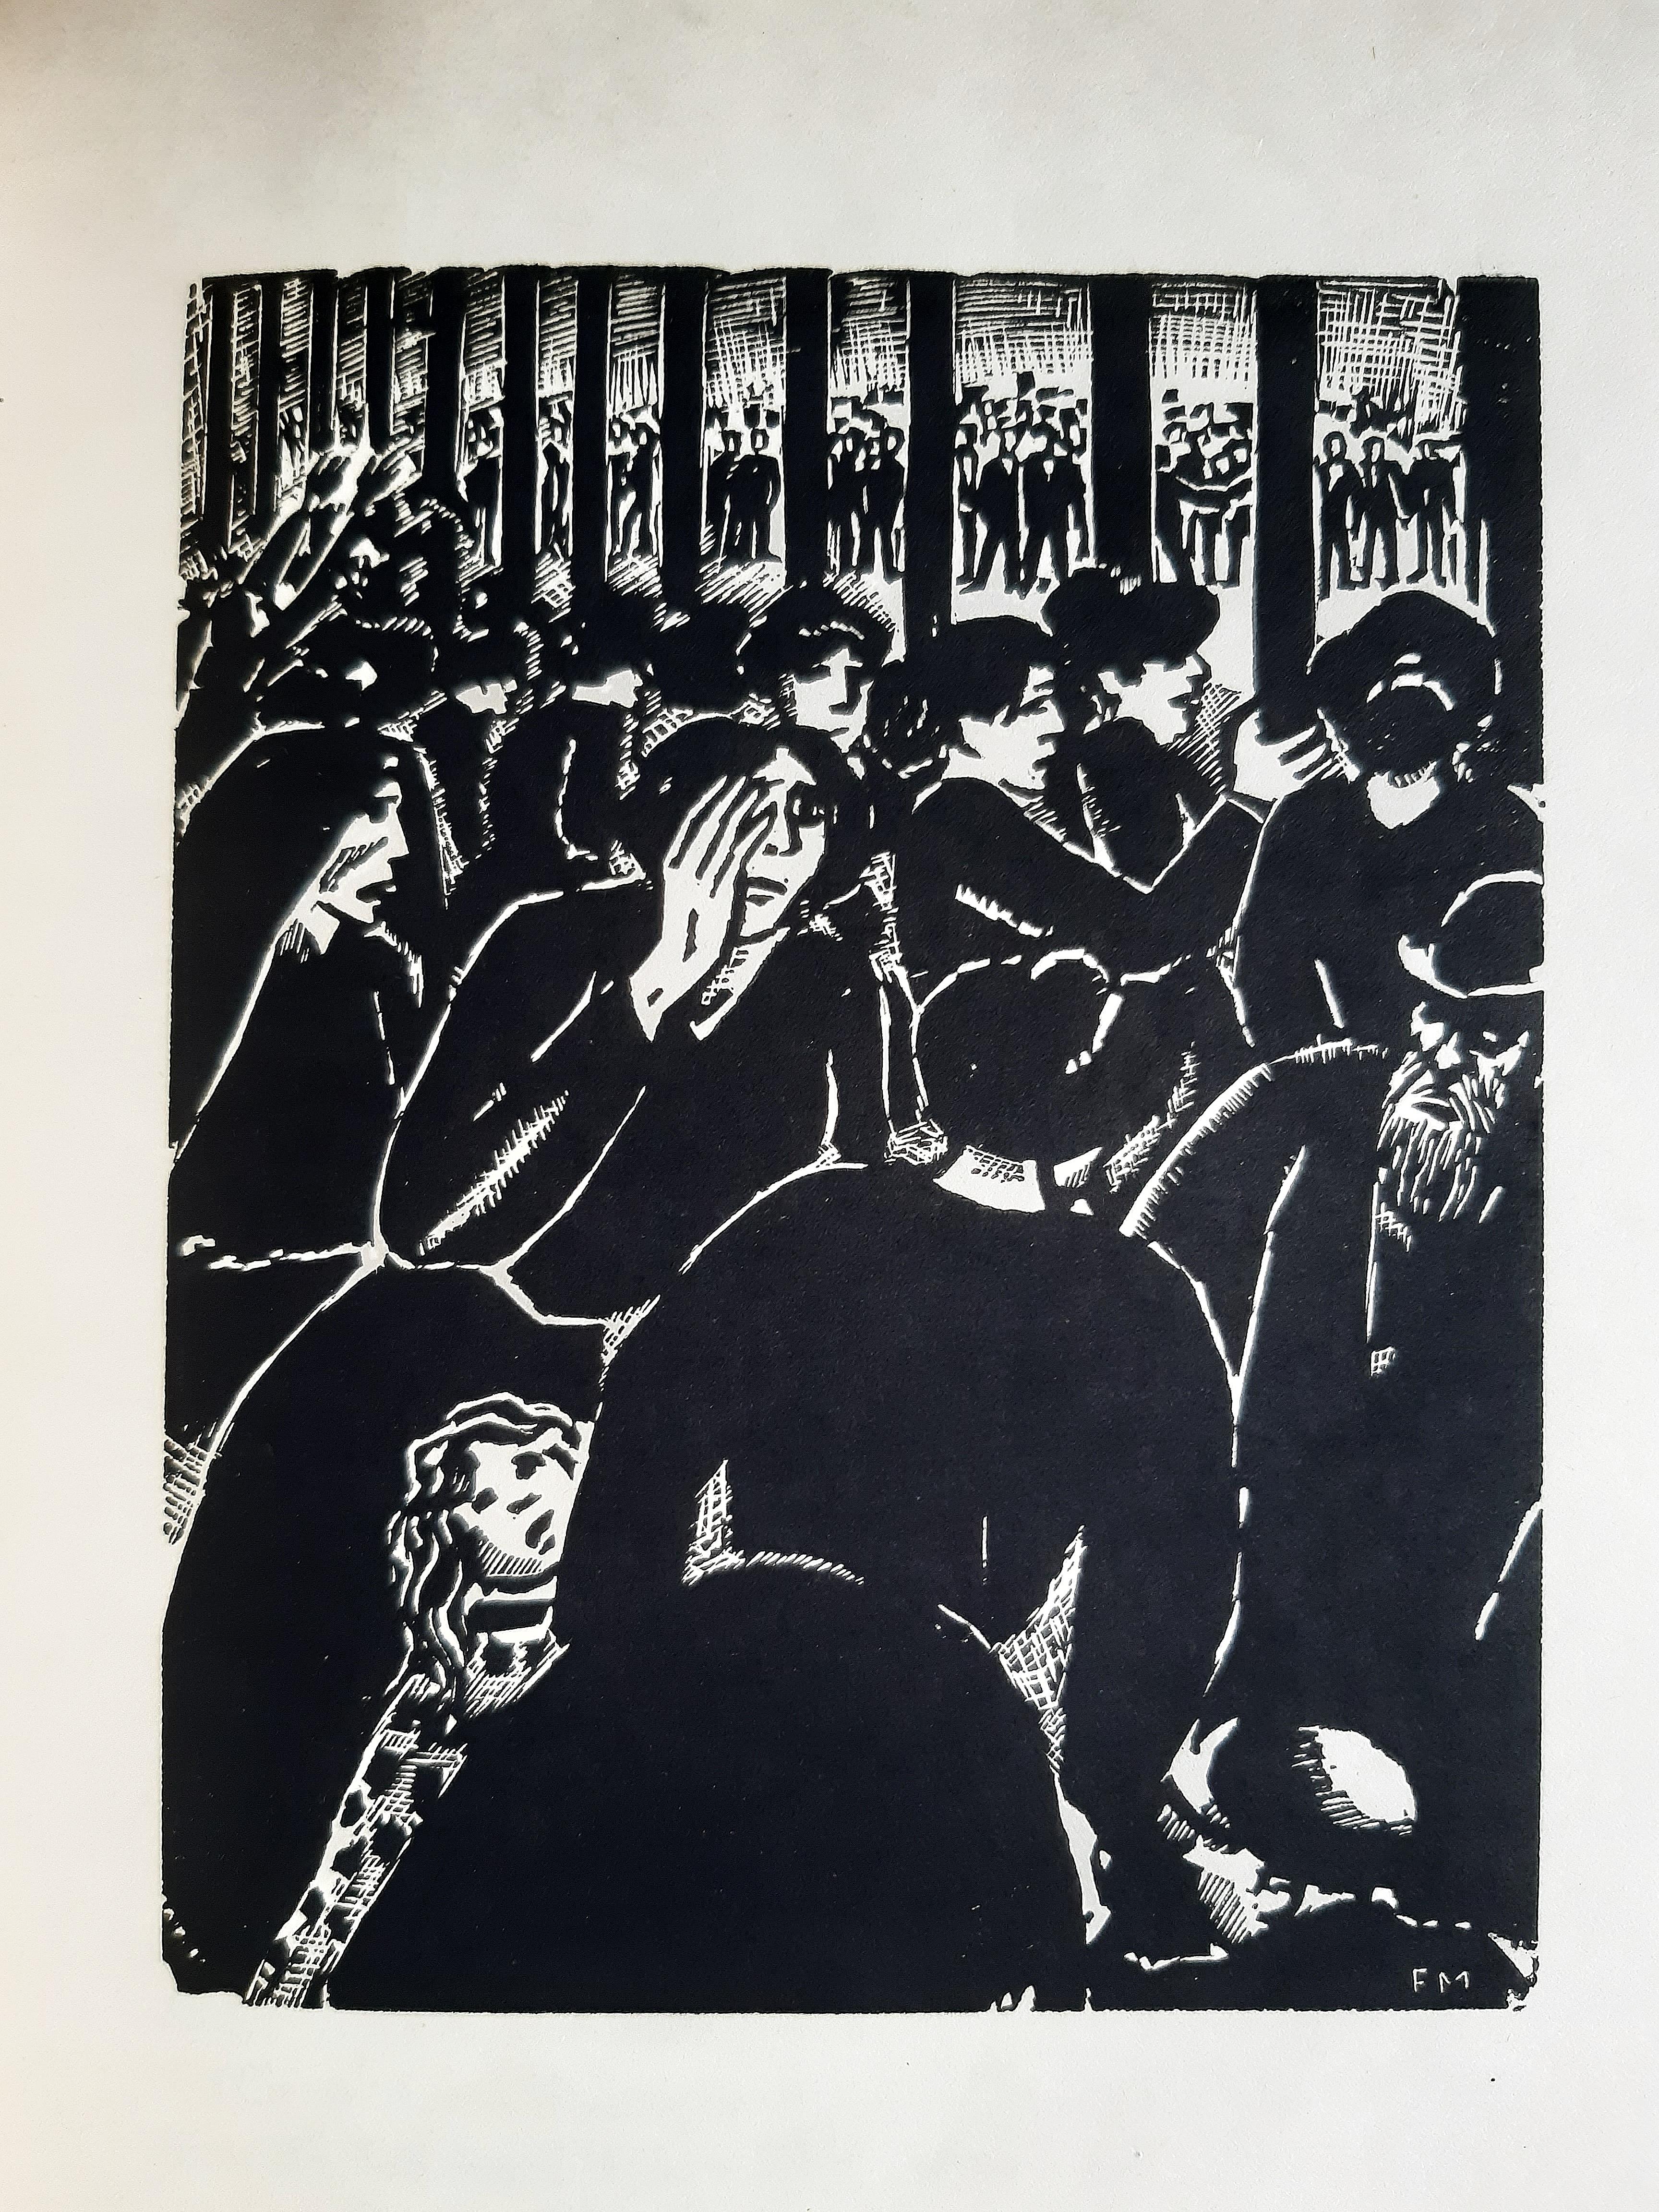 Die Mutter - Rare Book Illustrated by Frans Masereel - 1919 For Sale 2